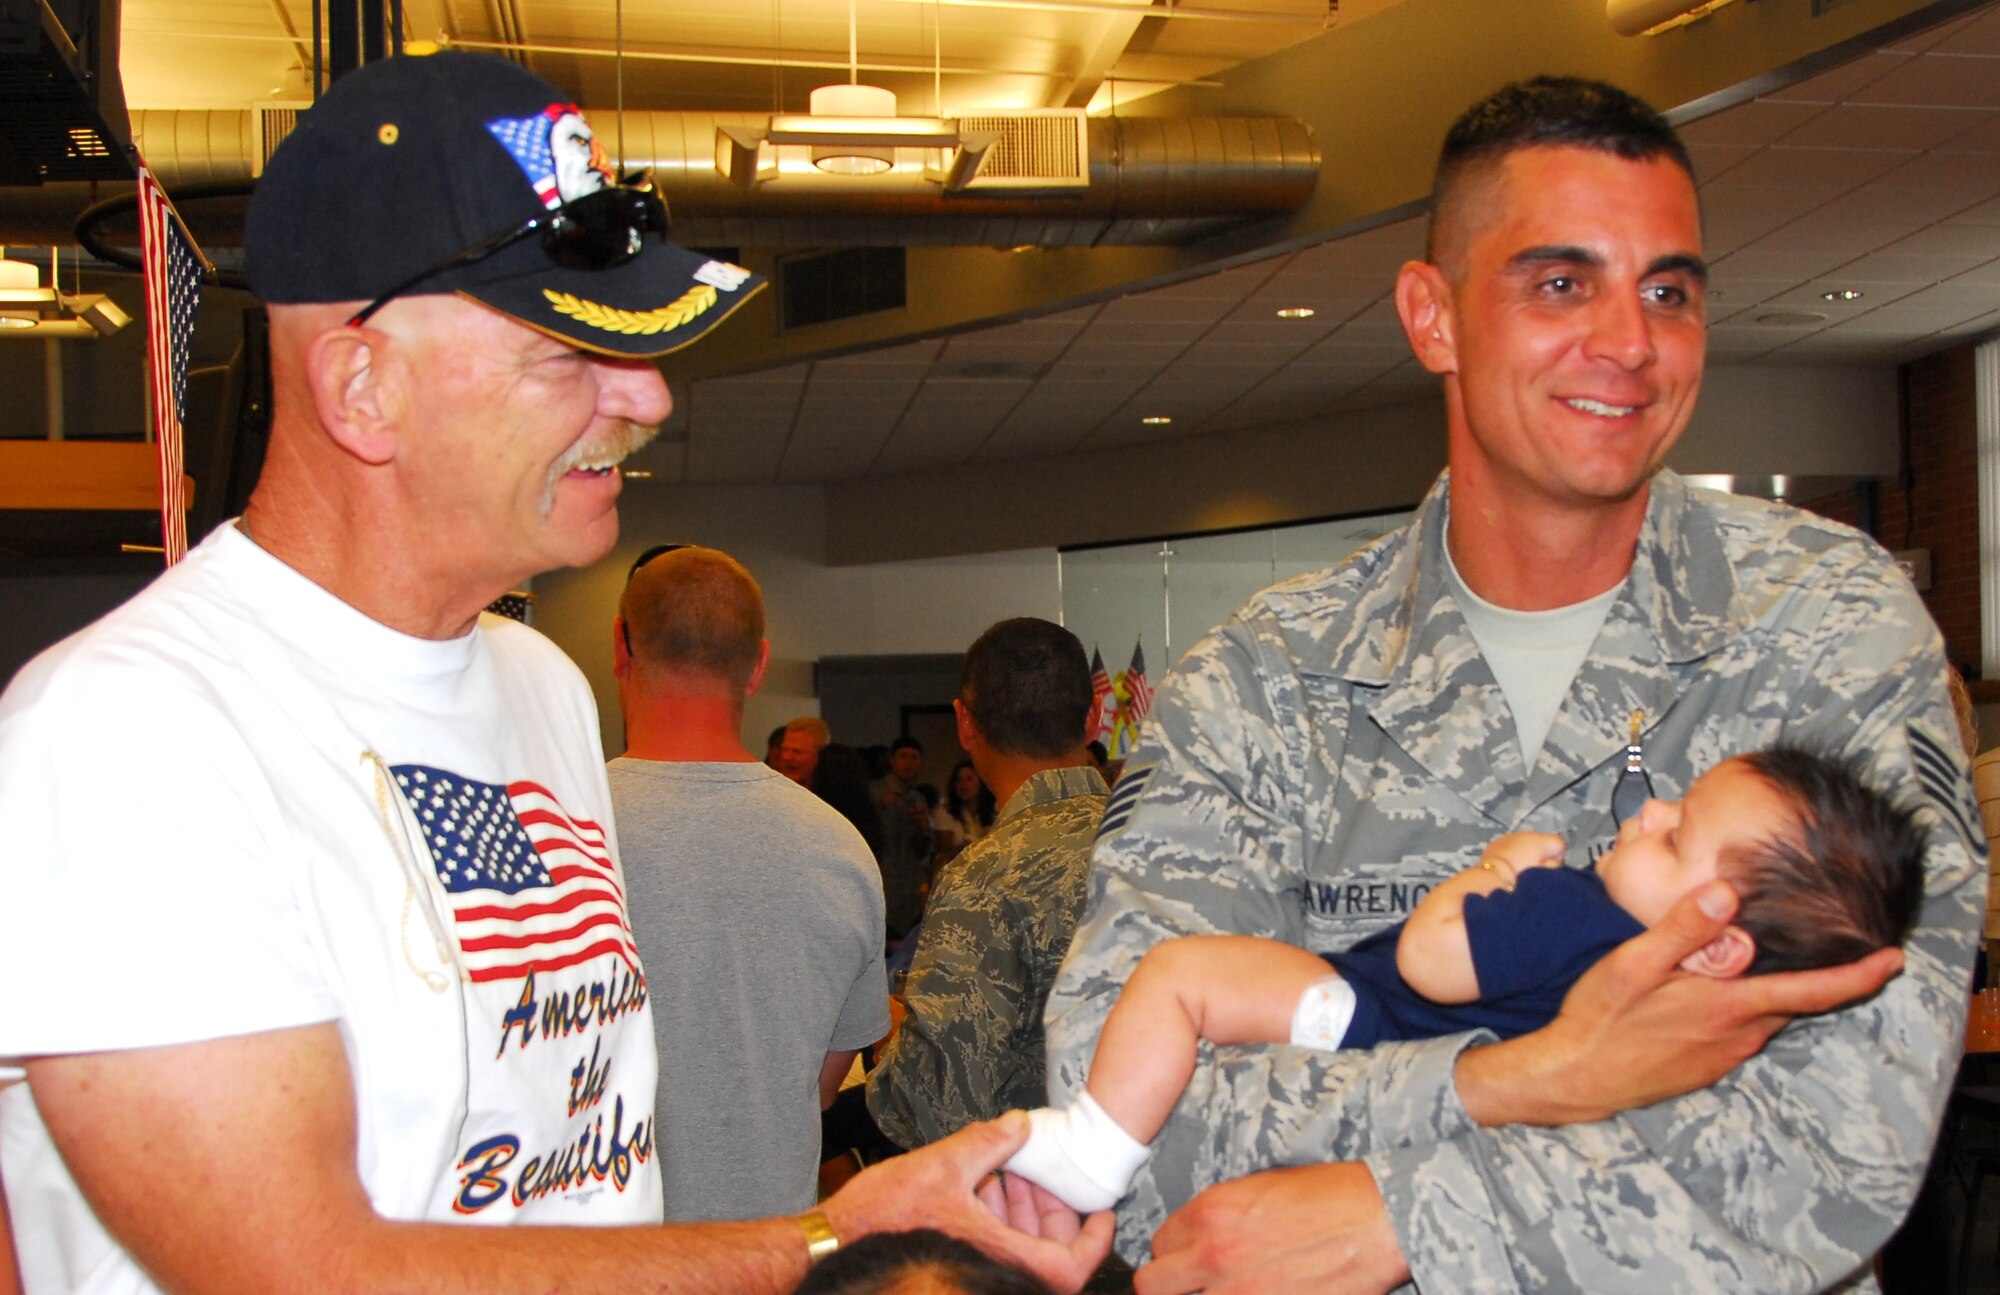 Staff Sgt. Dan Lawrence meets his son Ryan for the first time while his father Chief Master Sgt. (Ret.) Dan Lawrence looks on. All 19 of the wing’s Security Forces members returned home safely Aug. 23 after six months in Iraq. (Air National Guard photo by Master Sgt. Dave Neve)